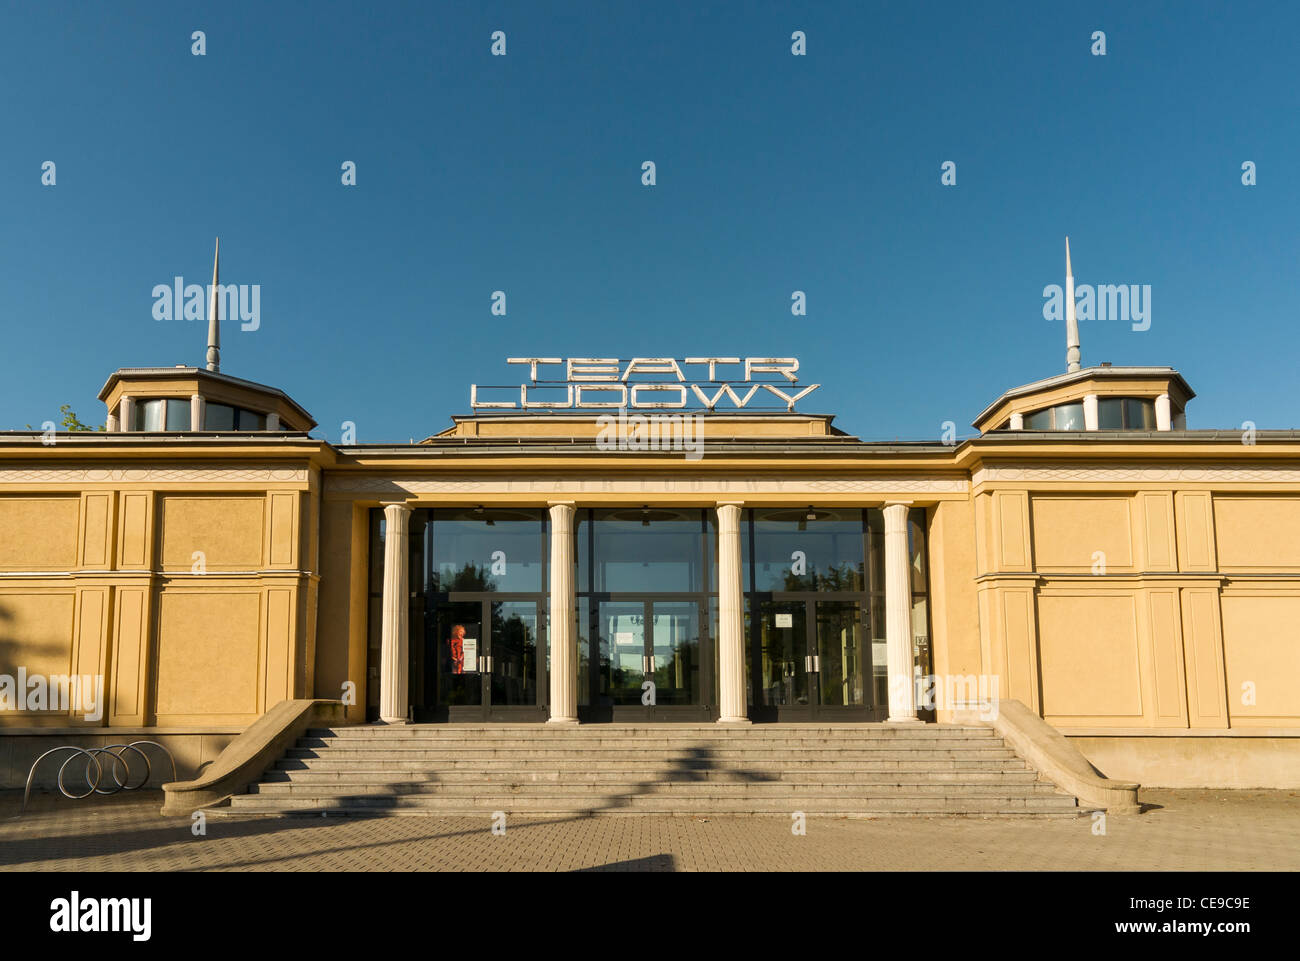 Teatr Ludowy (People's Theatre) by Architects Edmund Dąbrowski and Janusz Ingarden, Built in 1955 in Nowa Huta, Krakow, Poland Stock Photo